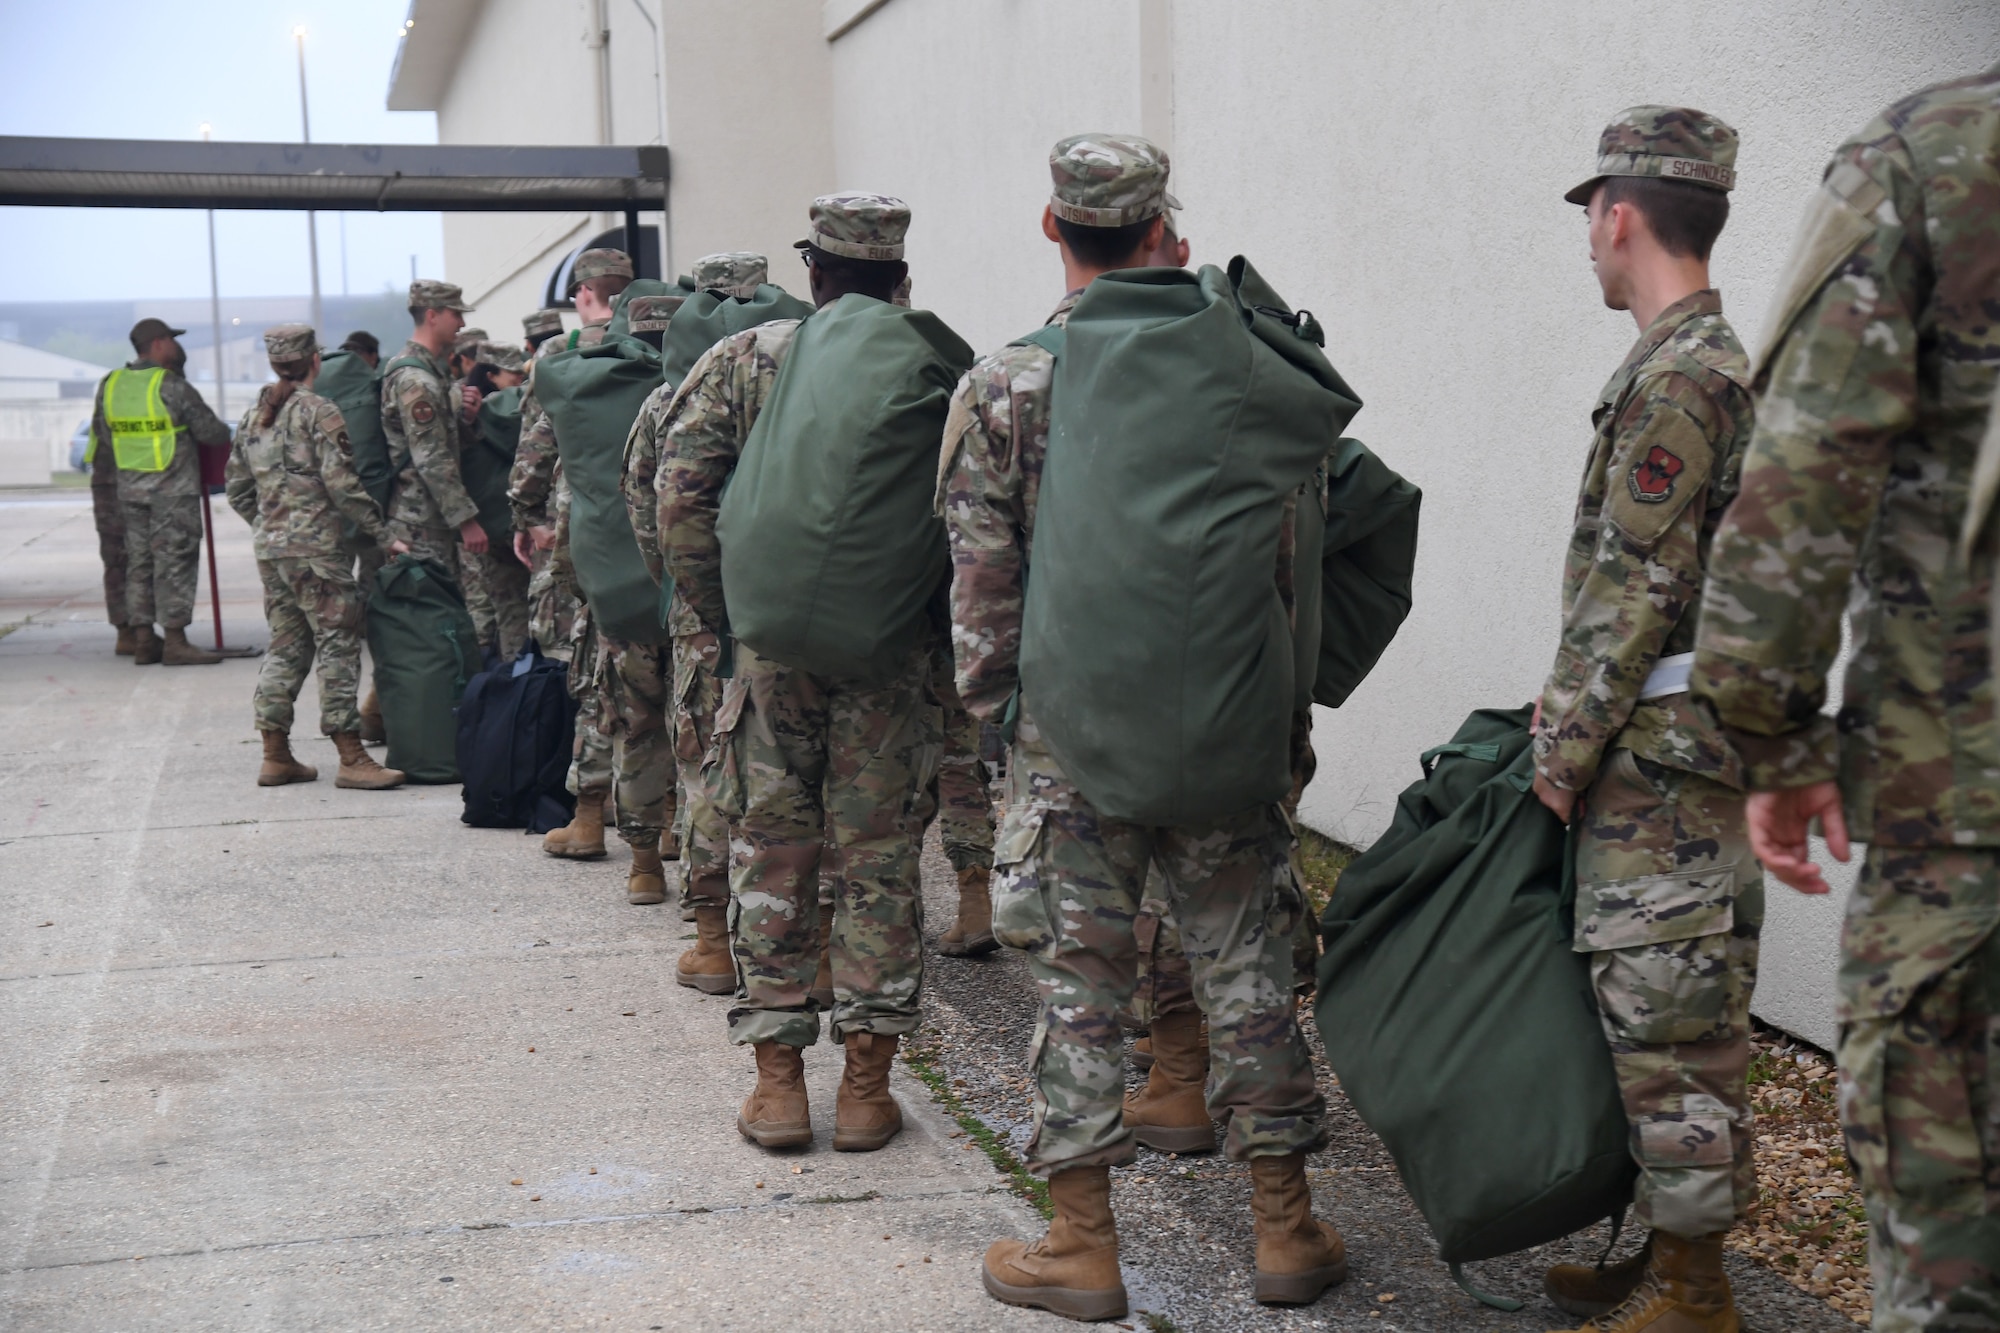 Airmen from the 81st Training Group line up outside of Allee Hall for shelter in-processing during a hurricane exercise at Keesler Air Force Base, Mississippi, April 29, 2022. Keesler personnel participate in exercise scenarios in preparation for hurricane season. (U.S. Air Force photo by Kemberly Groue)